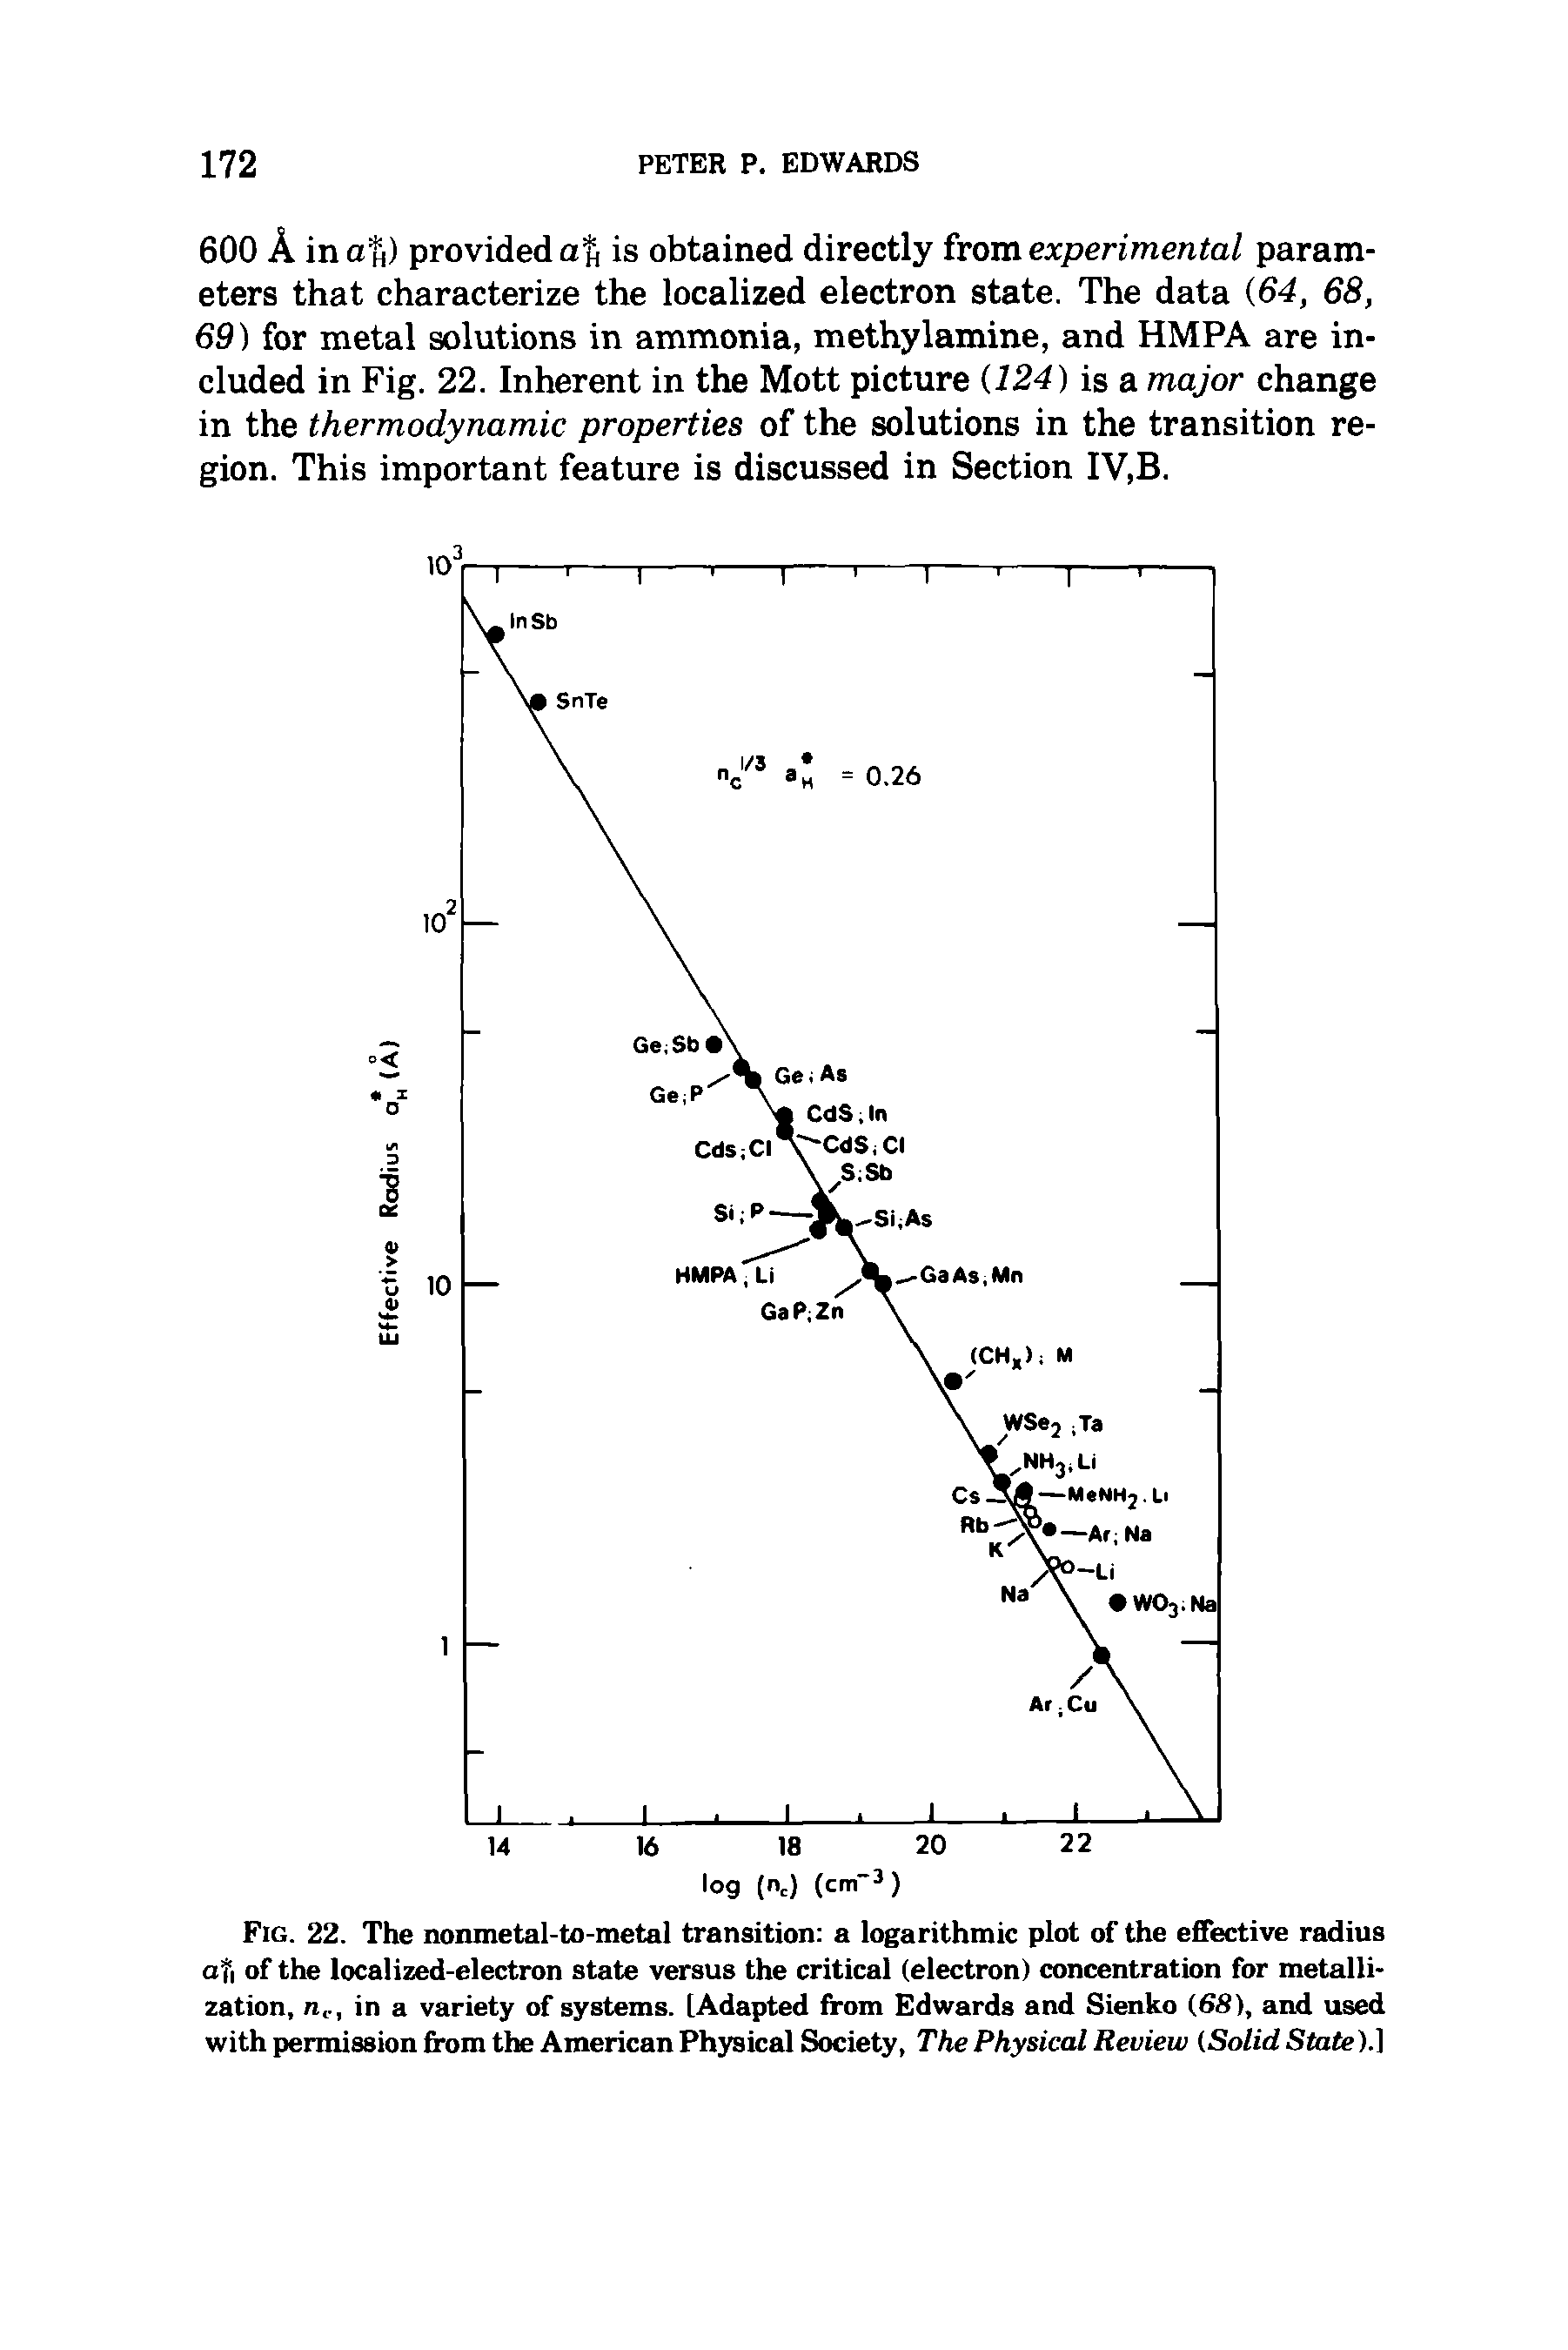 Fig. 22. The nonmetal-to-metal transition a logarithmic plot of the effective radius afi of the localized-electron state versus the critical (electron) concentration for metallization, n,., in a variety of systems. [Adapted from Edwards and Sienko (68), and used with permission from the American Physical Society, The Physical Review (Solid Stale).)...